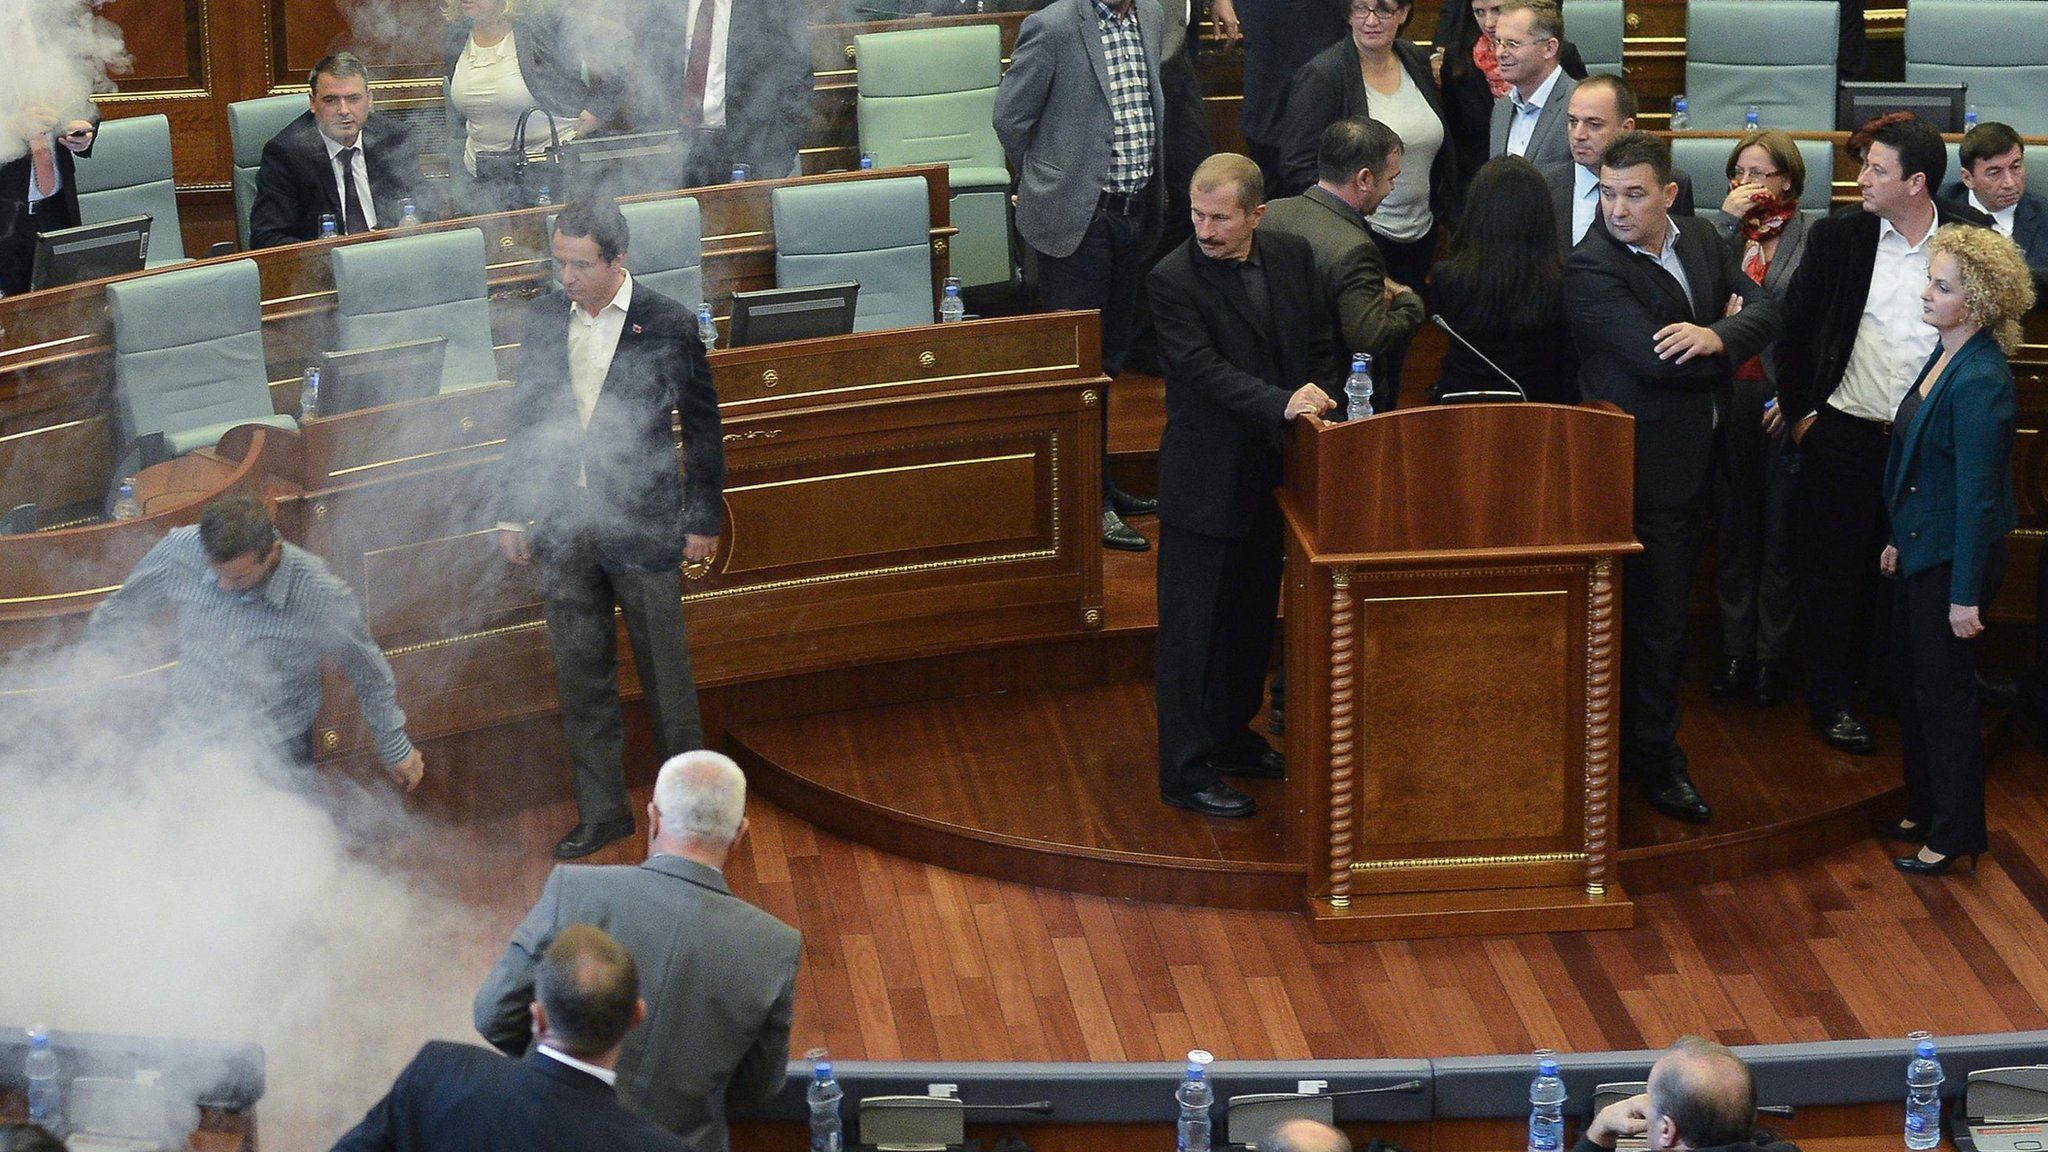 Opposition lawmakers throw tear gas during a session of Kosovo's parliament in Pristina, Kosovo (15 October 2015)